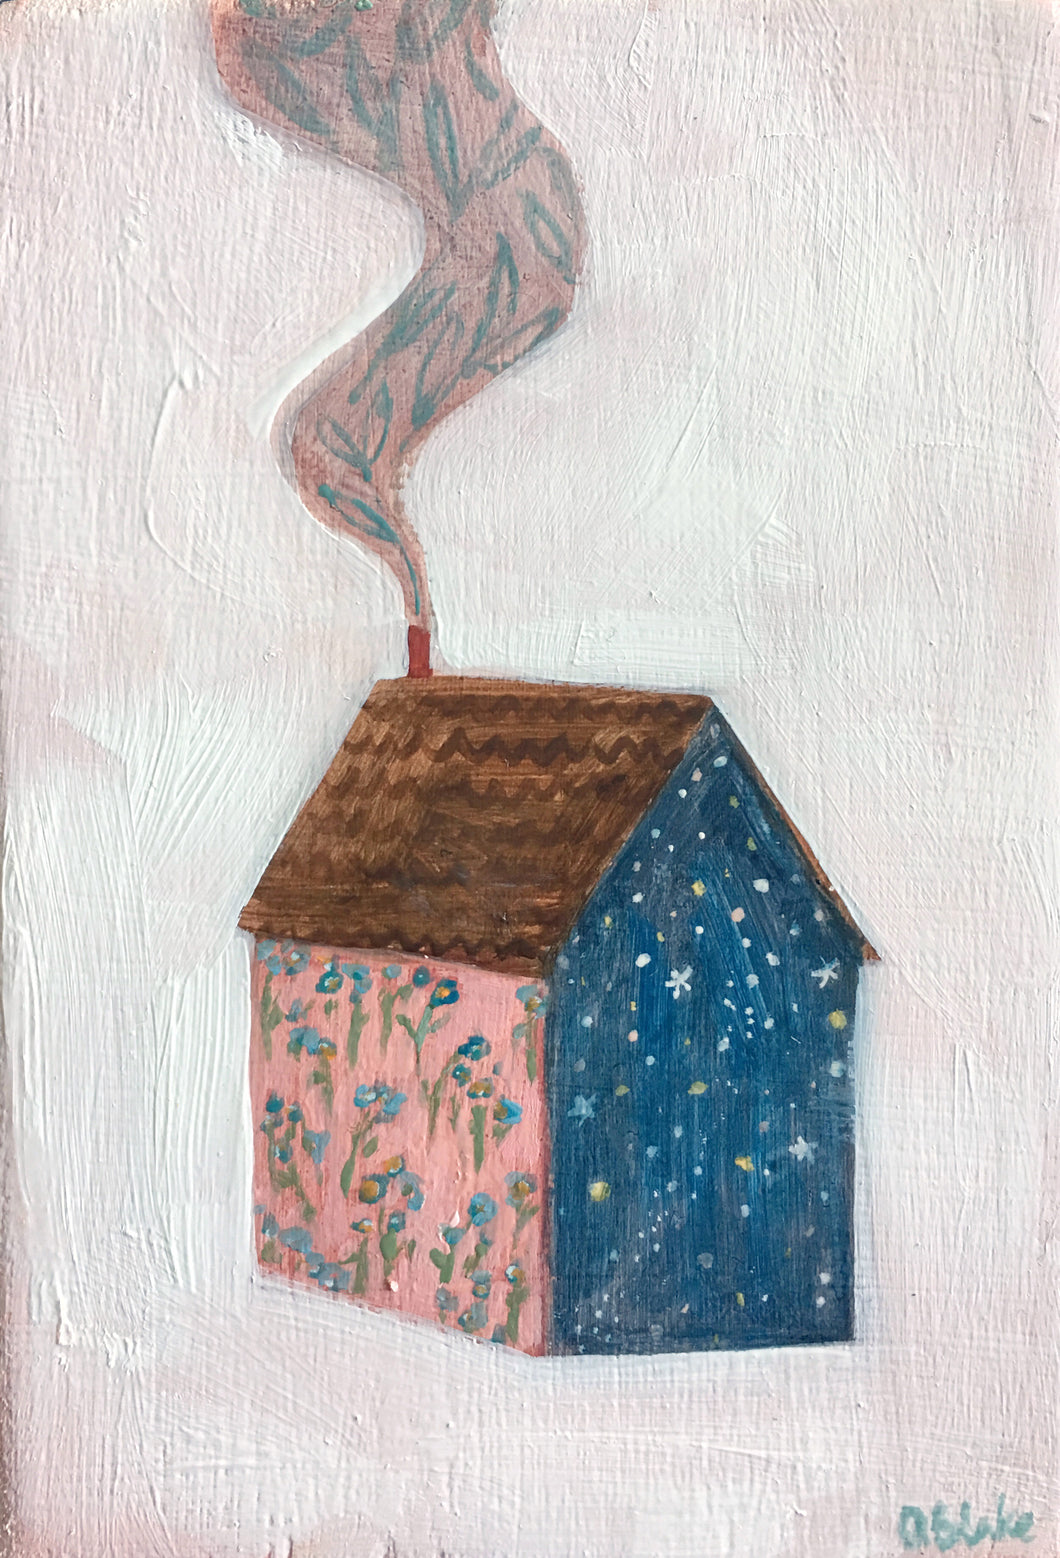 A home made of starlight and memories